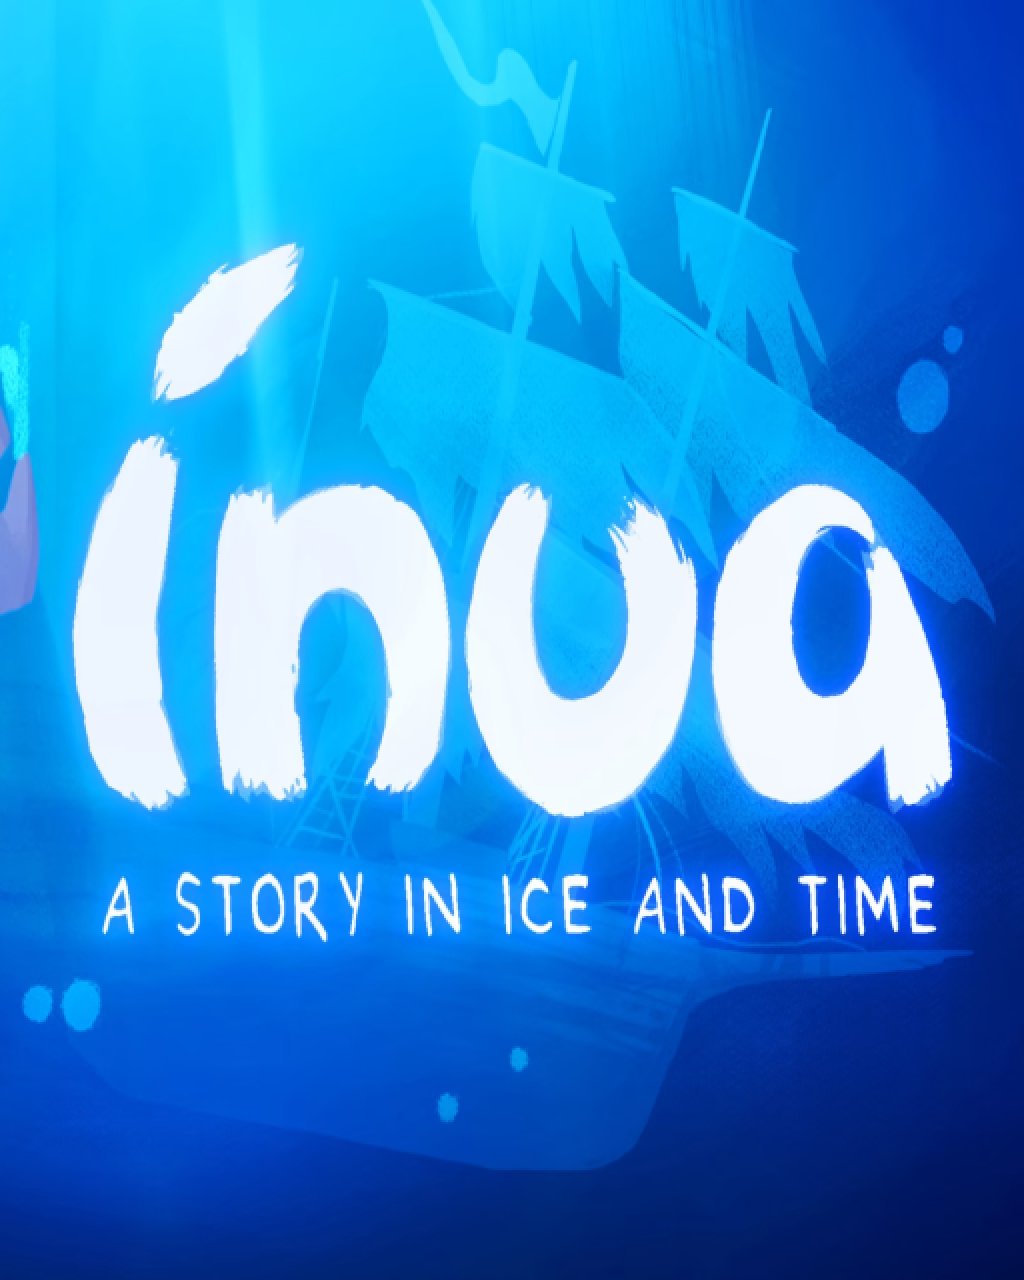 Inua A Story in Ice and Time